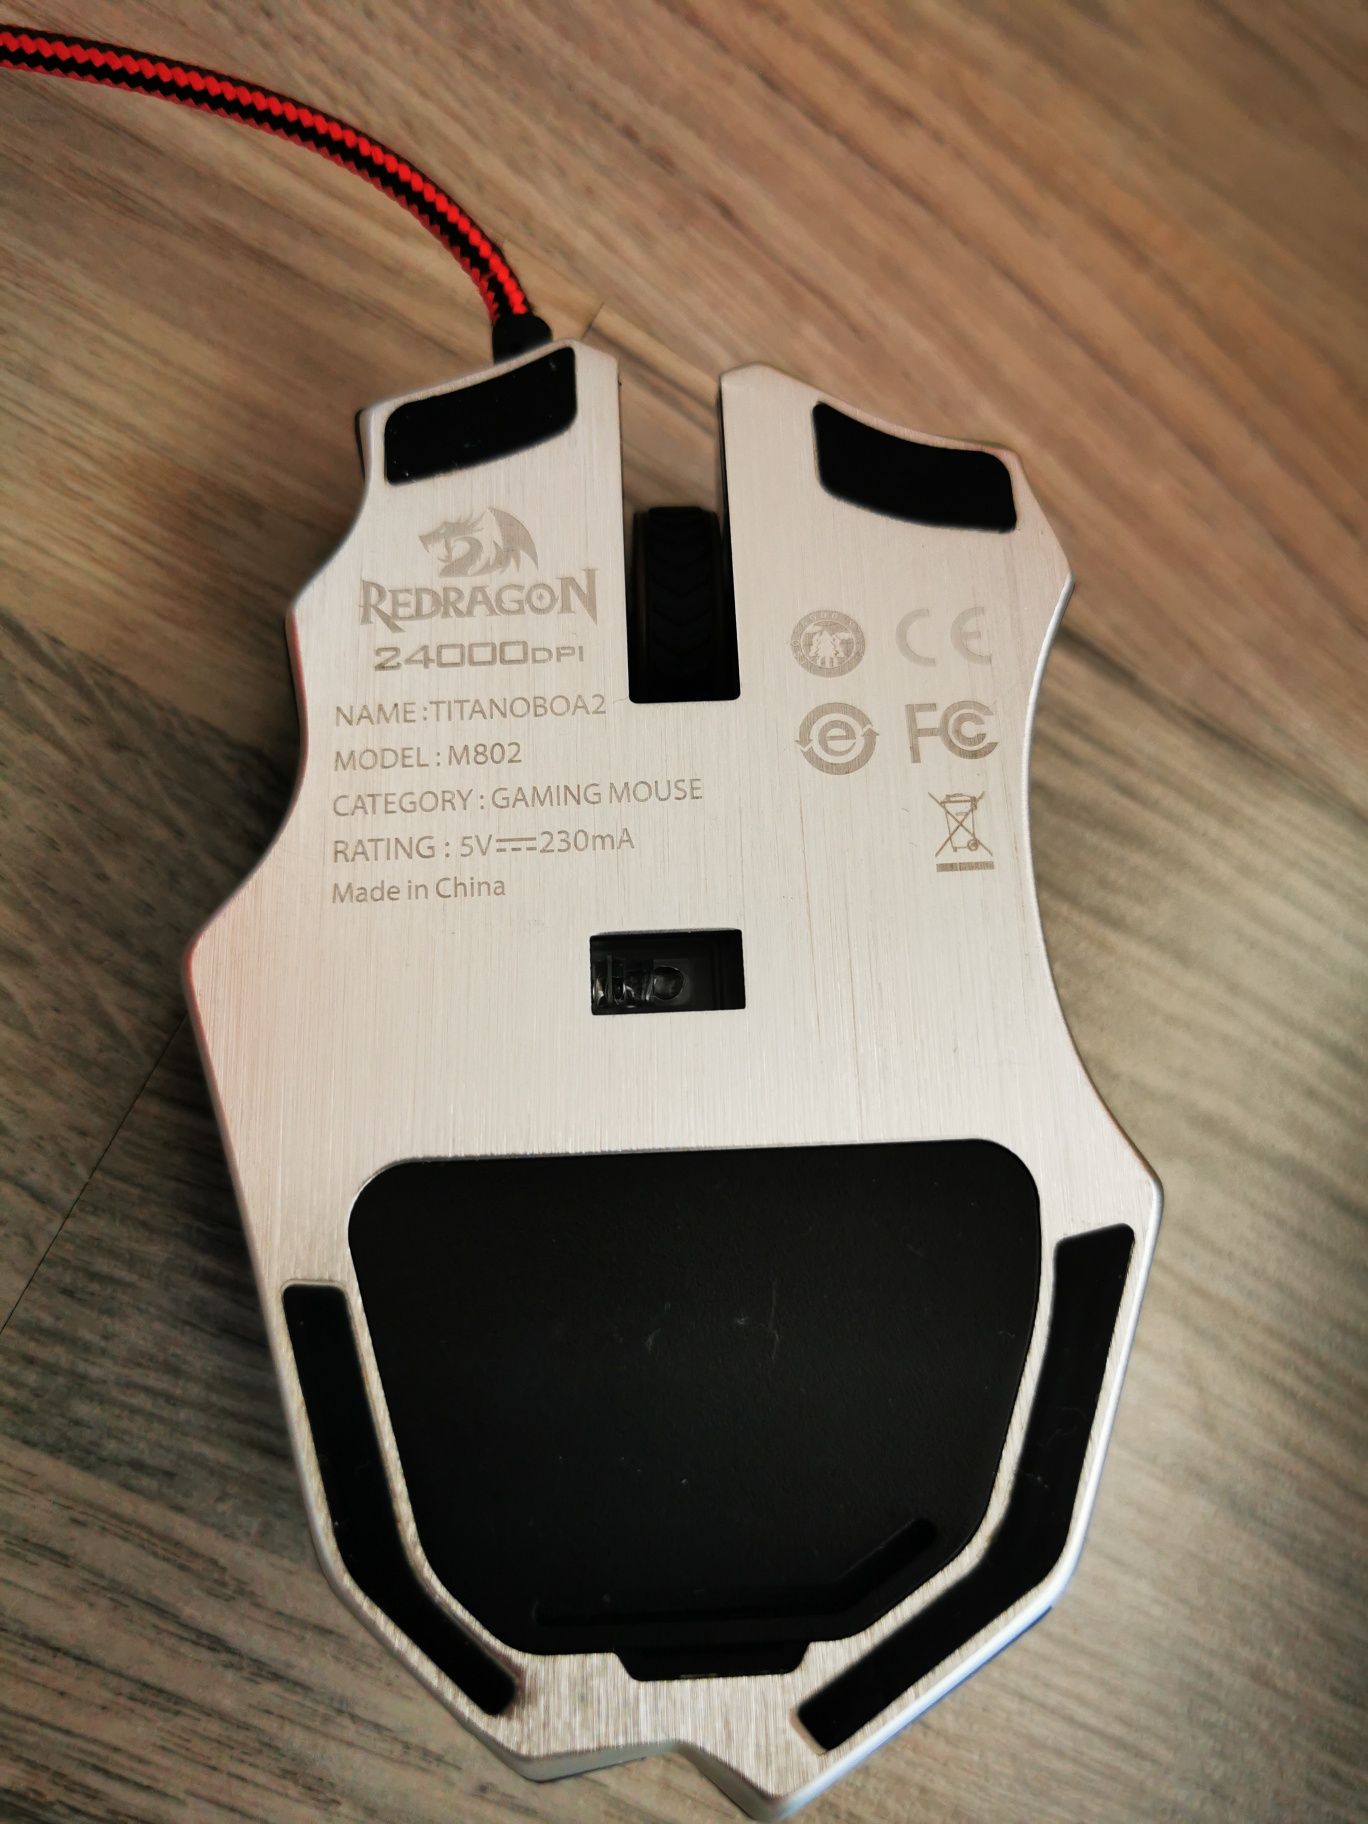 Mouse Redragon impecabil